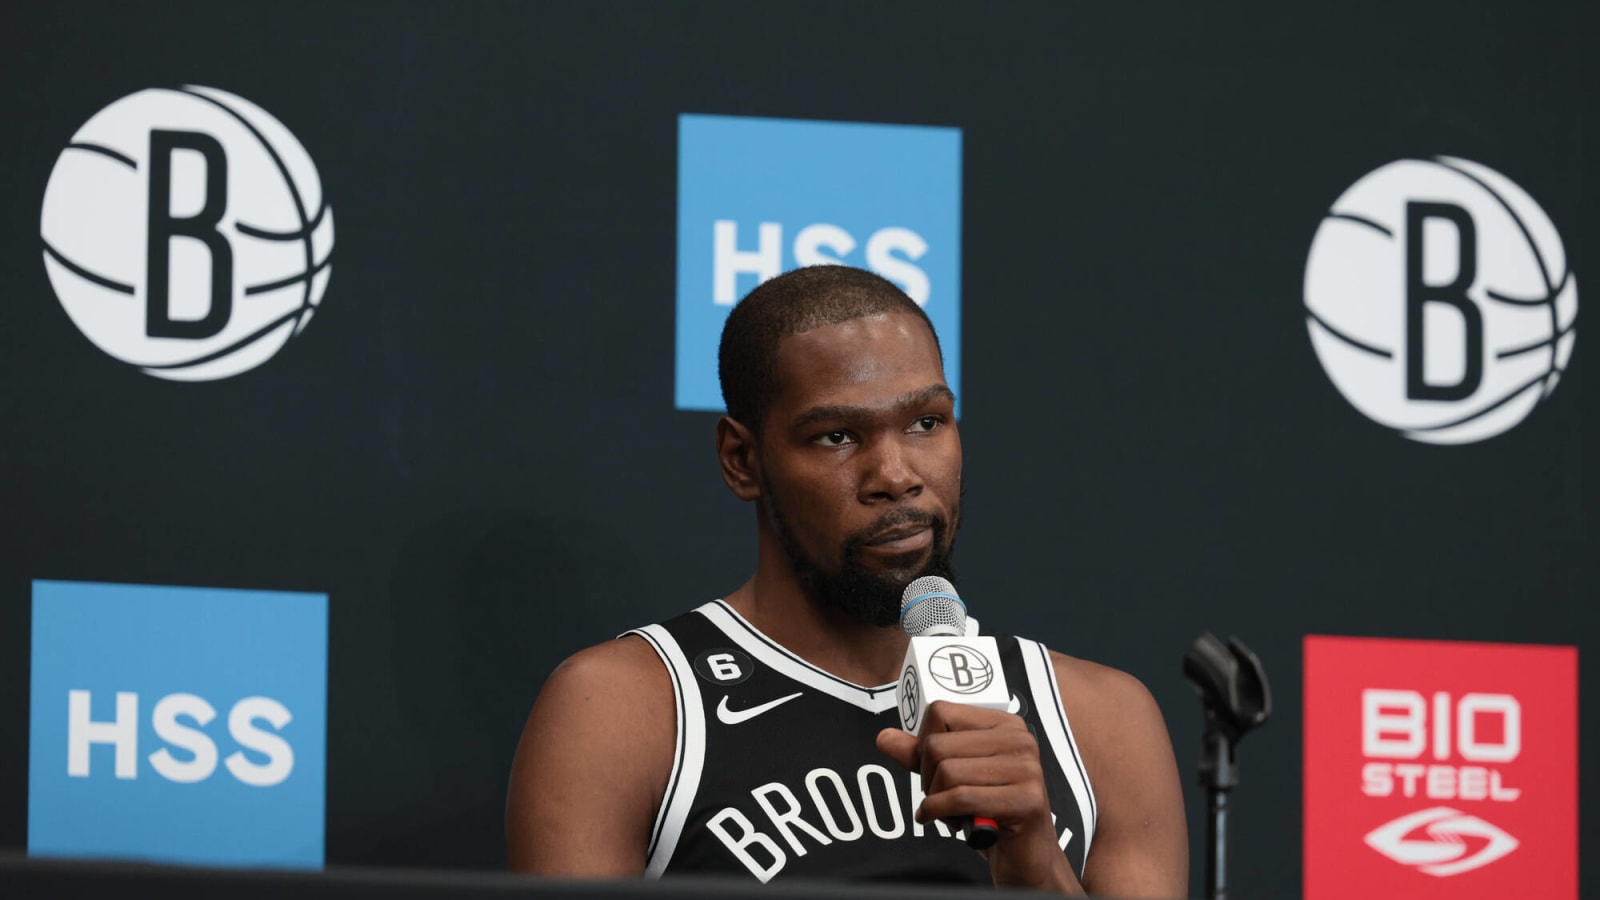 Kevin Durant Urges The Nets To Learn From The Warriors And Stephen Curry: "He Was Injured Going Into The Playoffs. The Team Still, You Know, Fought And Won Games."